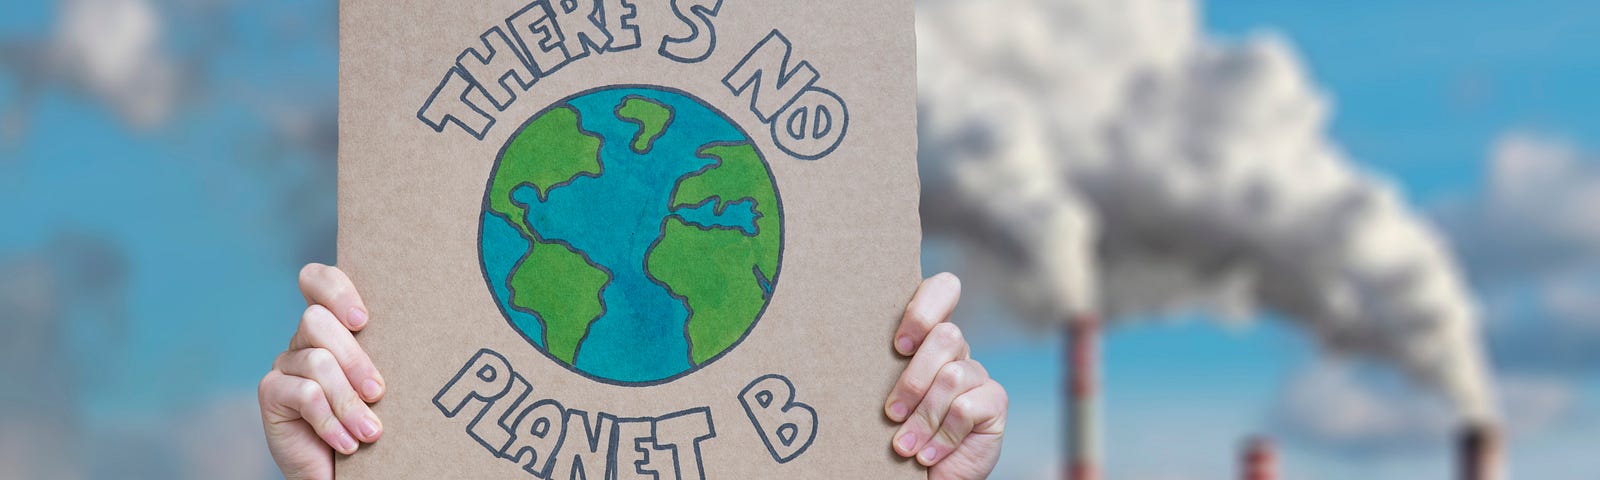 Photo of a hand-lettered cardboard sign reading “There’s no planet B” in the foreground against a three-stack fossil-fuel-burining plant in the background